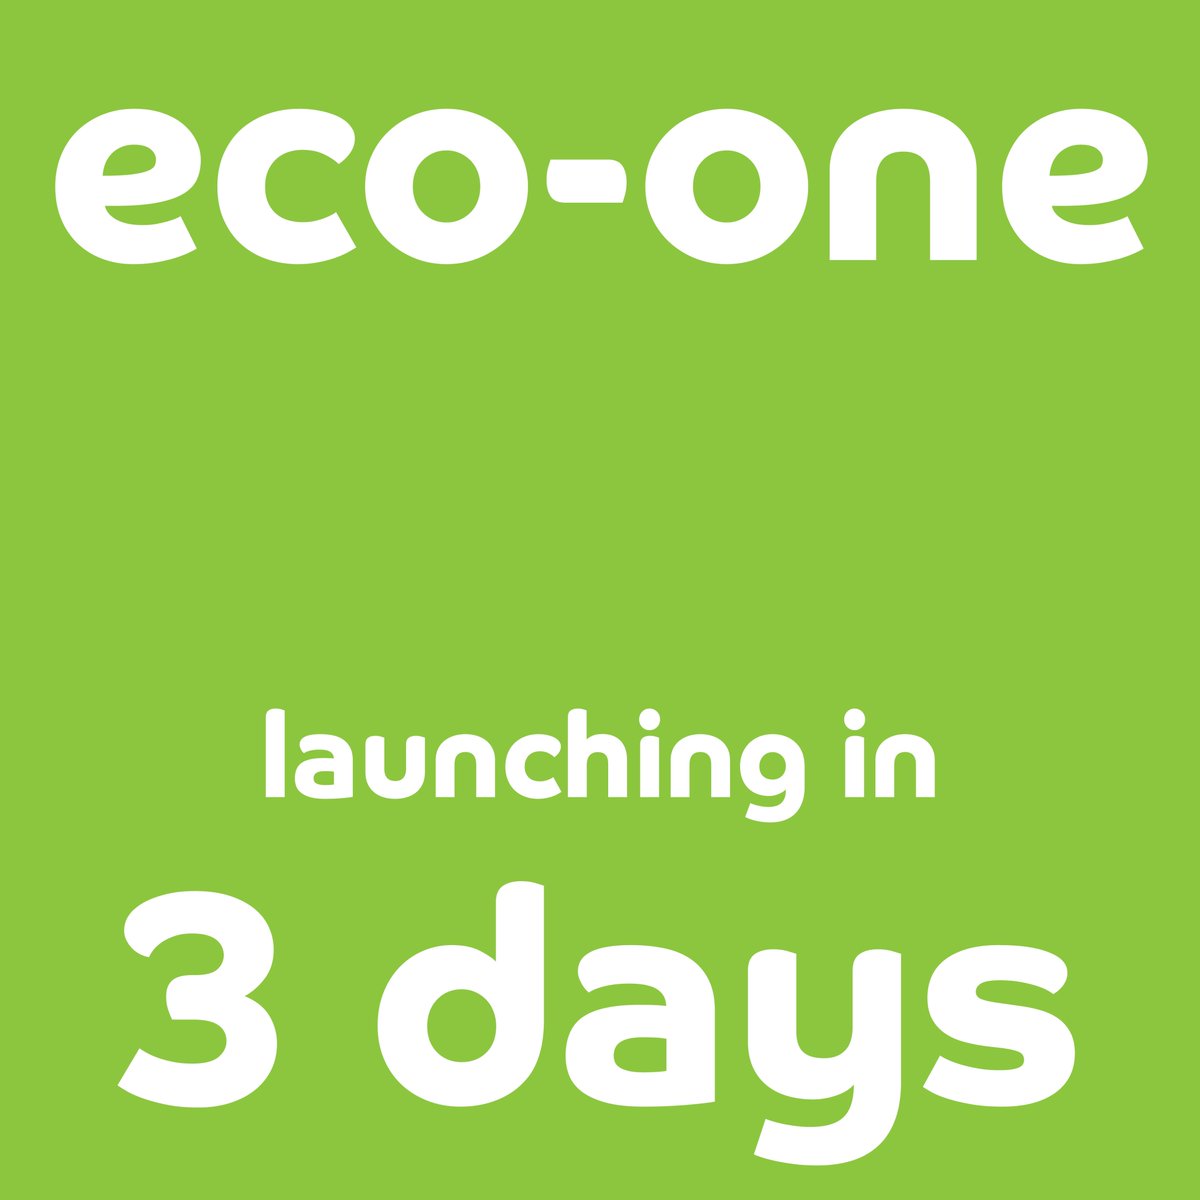 ECO-ONE 💚🌍♻
#GetCleanGoGreen
Our new #plasticfree #chemical #sachet range 👀    
Find out more: tinyurl.com/bdew4apw 
Eliminates #singleuse #plastics
Fully #recyclable packaging
#Reduces your #carbonfootprint by 95%
100% #Biodegradable

#cleaning #business #ecoone #eco